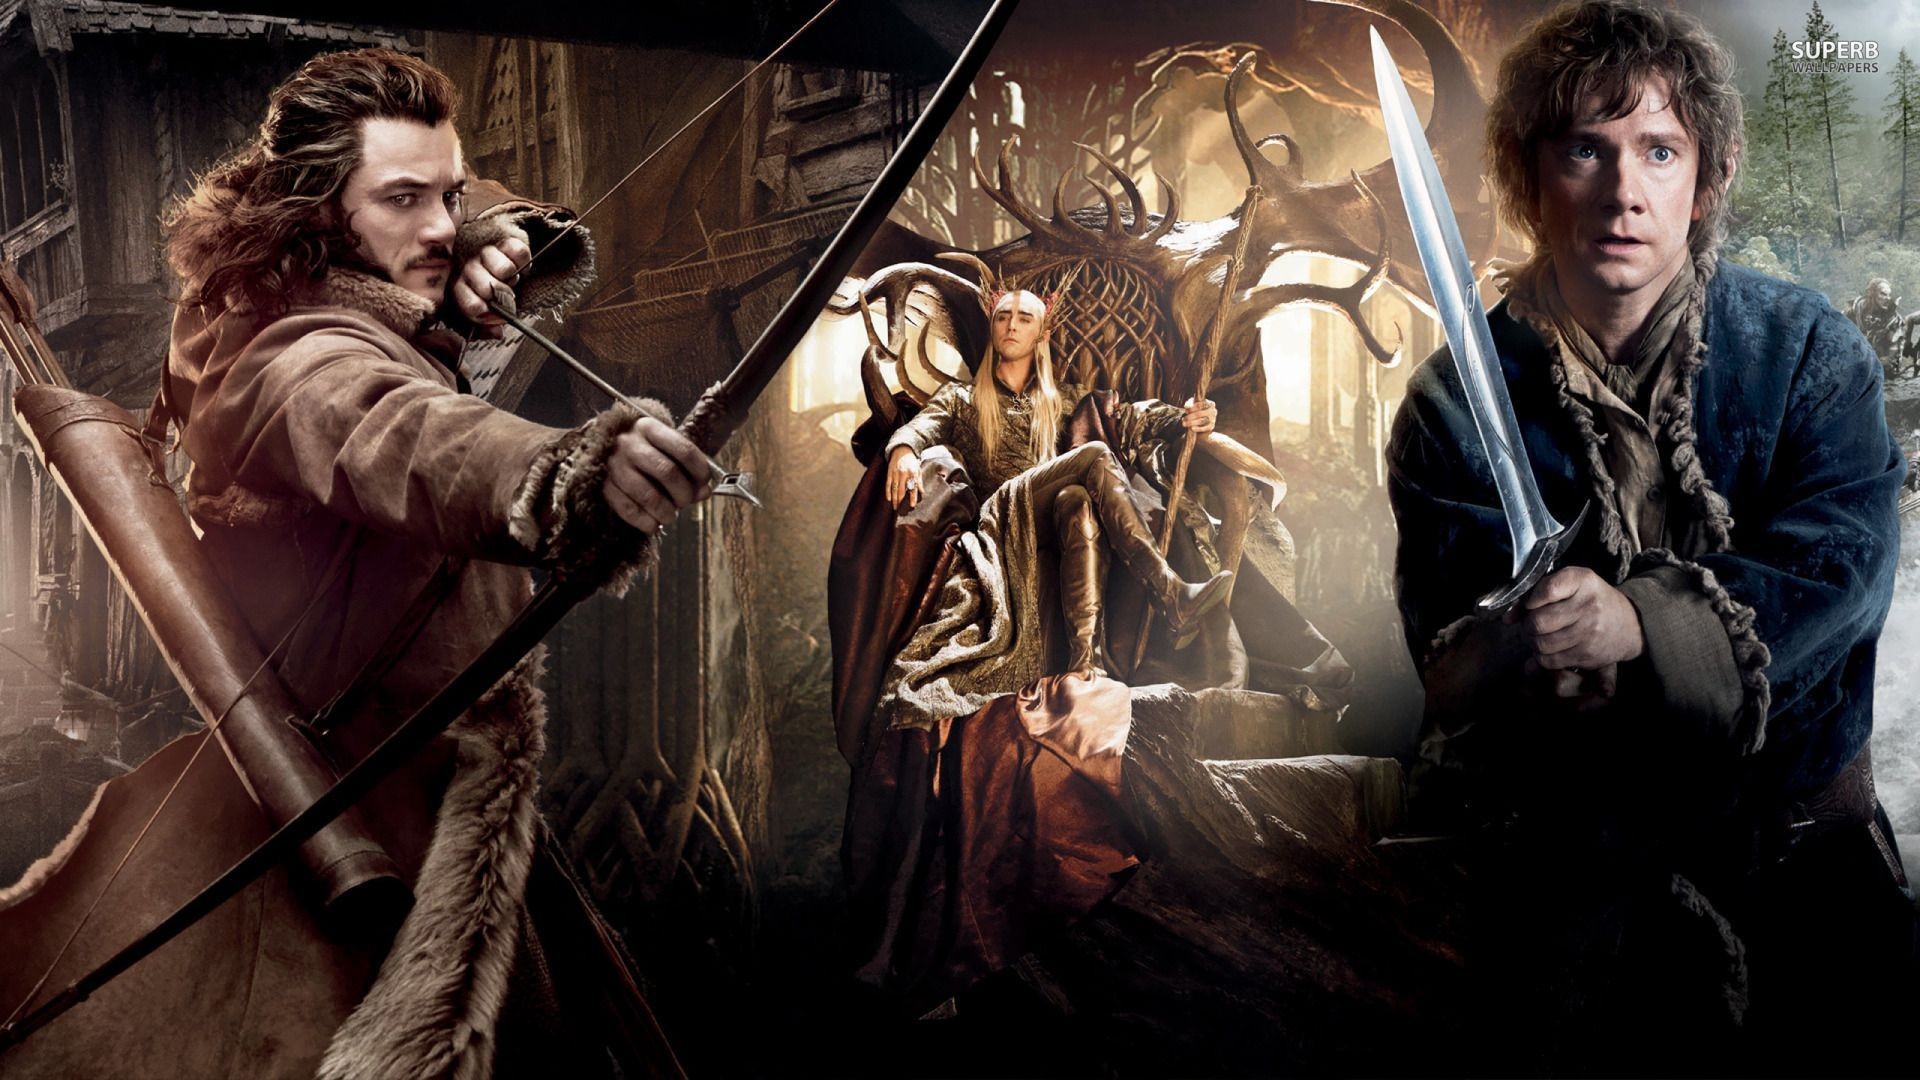 The Hobbit: The Desolation of Smaug wallpaper – Movie wallpapers .